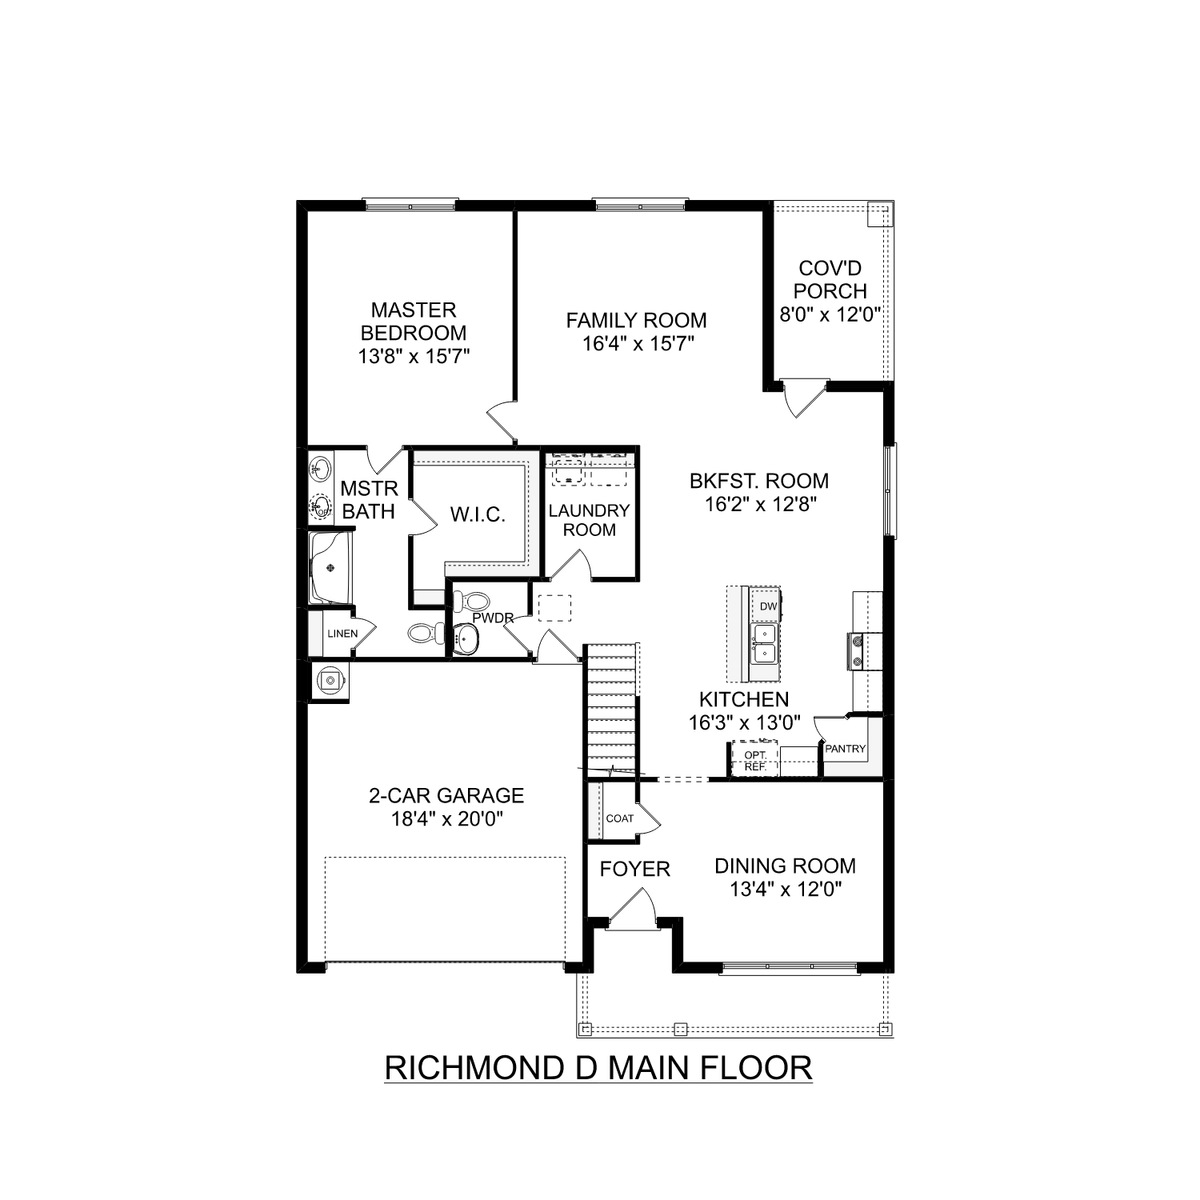 1 - The Richmond D floor plan layout for 104 Shearwater Drive in Davidson Homes' Walker's Hill community.